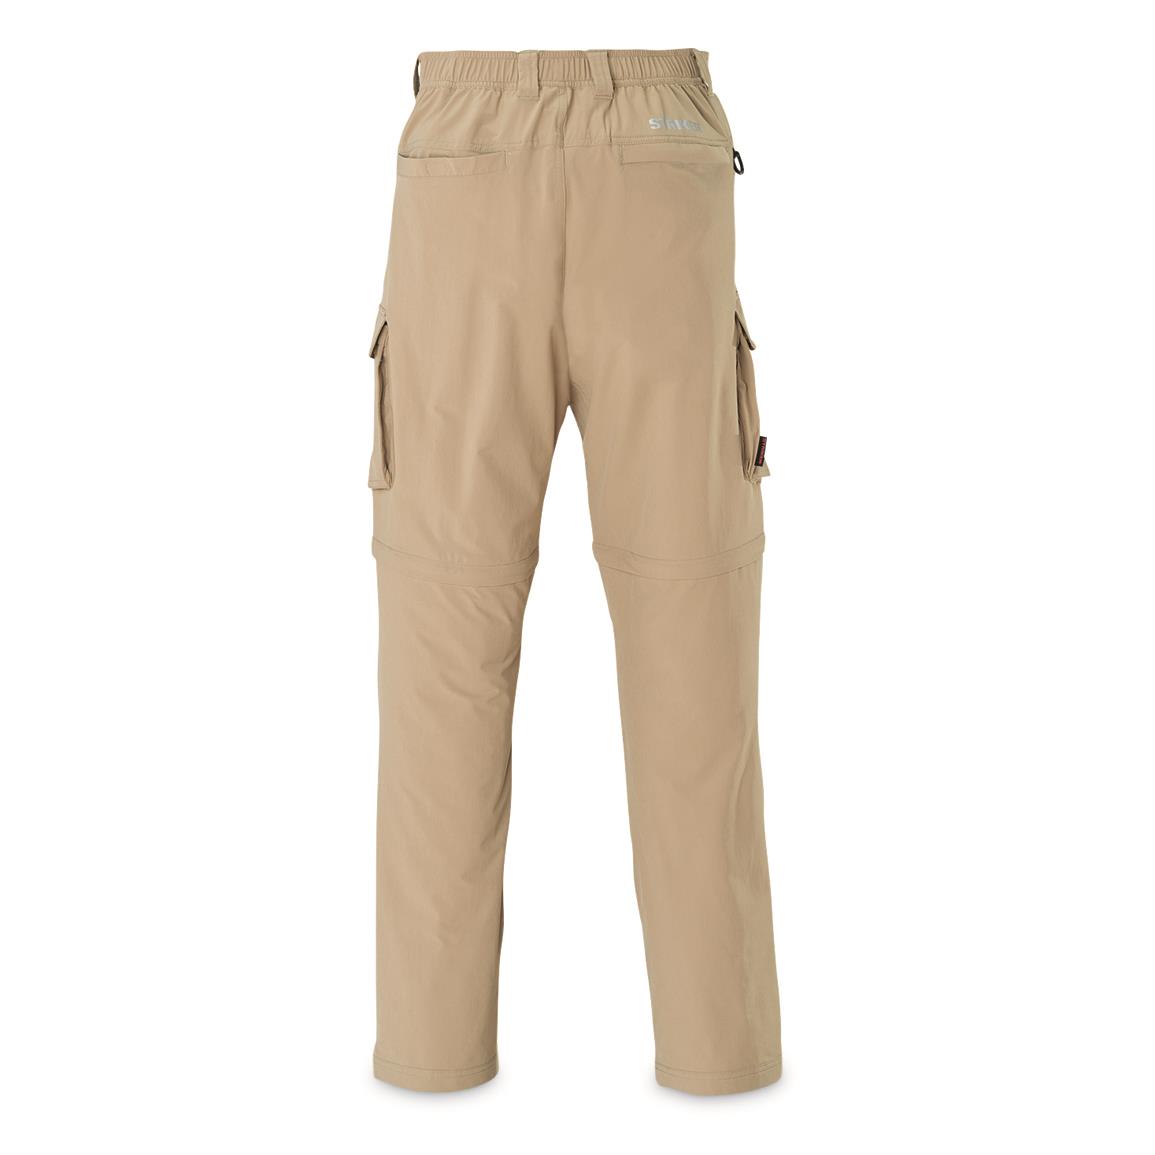 Guide Gear Outdoor 2.0 Flannel-Lined Cotton Cargo Pants, Khaki